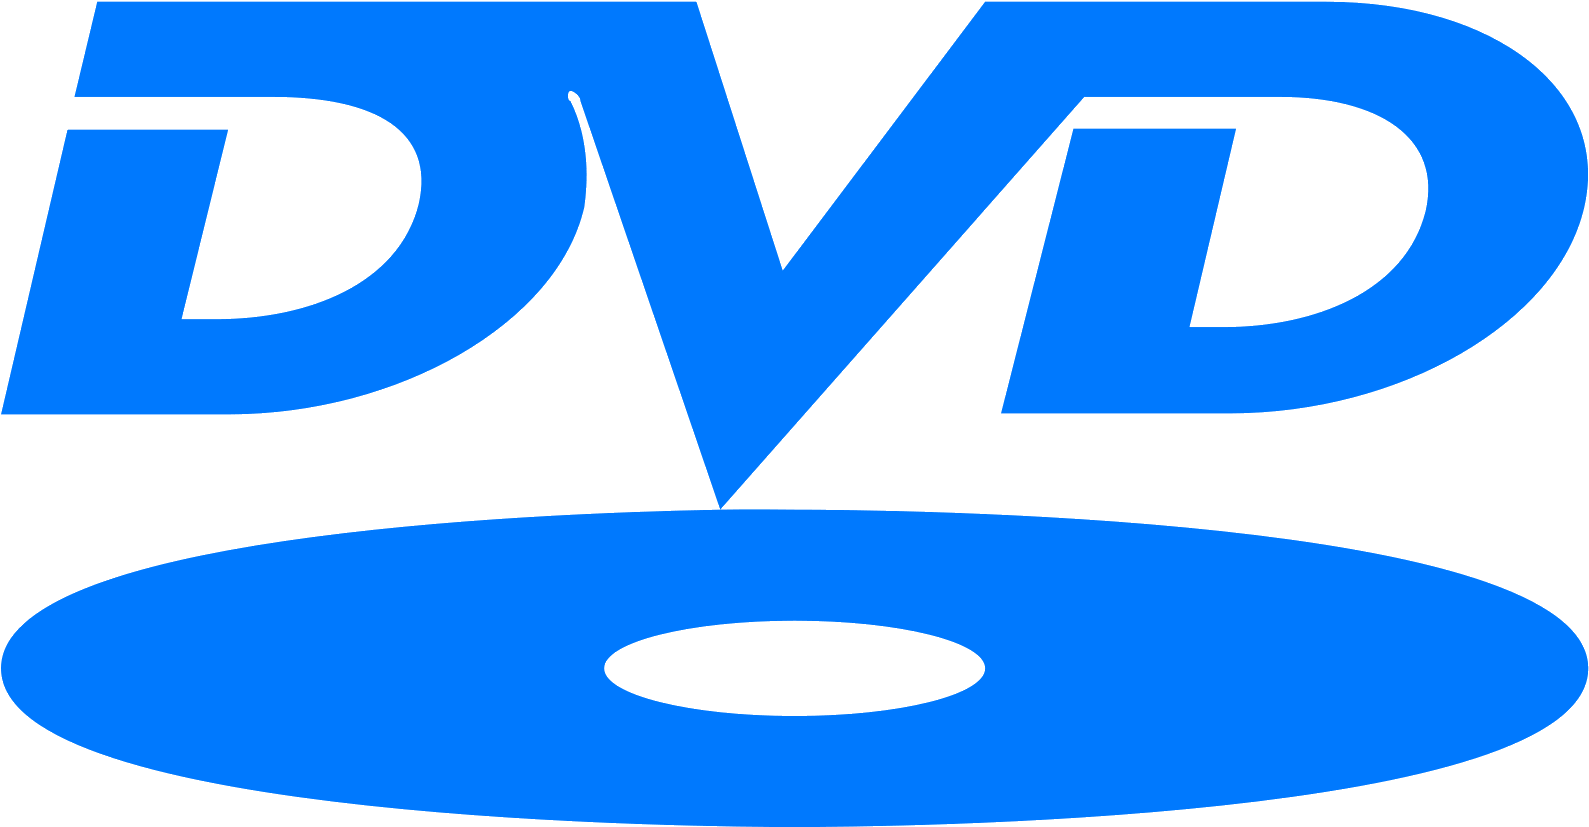 Download Hd Dvd Dvd Video Logo Dvd Video Logo Old Png Image With No Background Pngkey Com